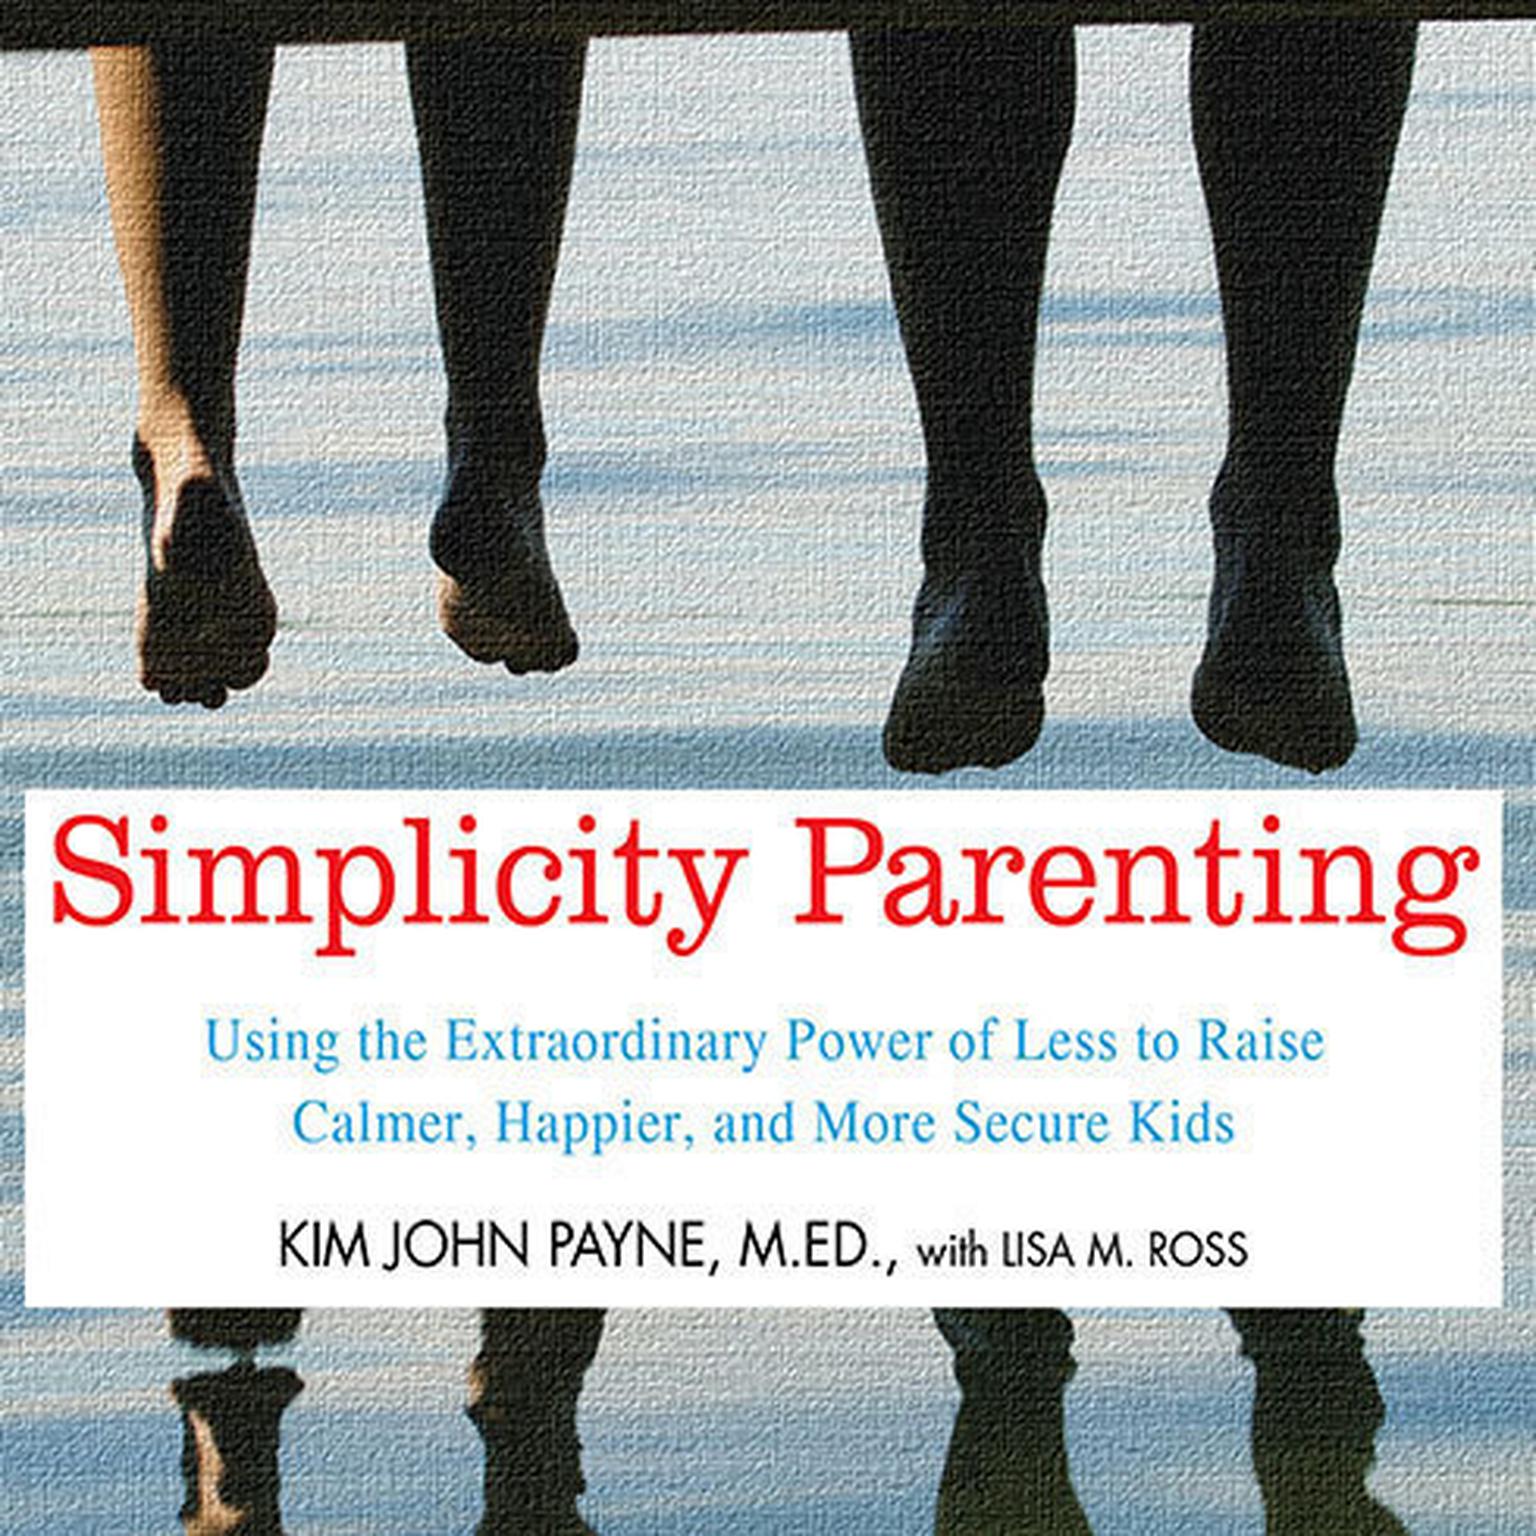 Simplicity Parenting: Using the Extraordinary Power of Less to Raise Calmer, Happier, and More Secure Kids Audiobook, by Kim John Payne